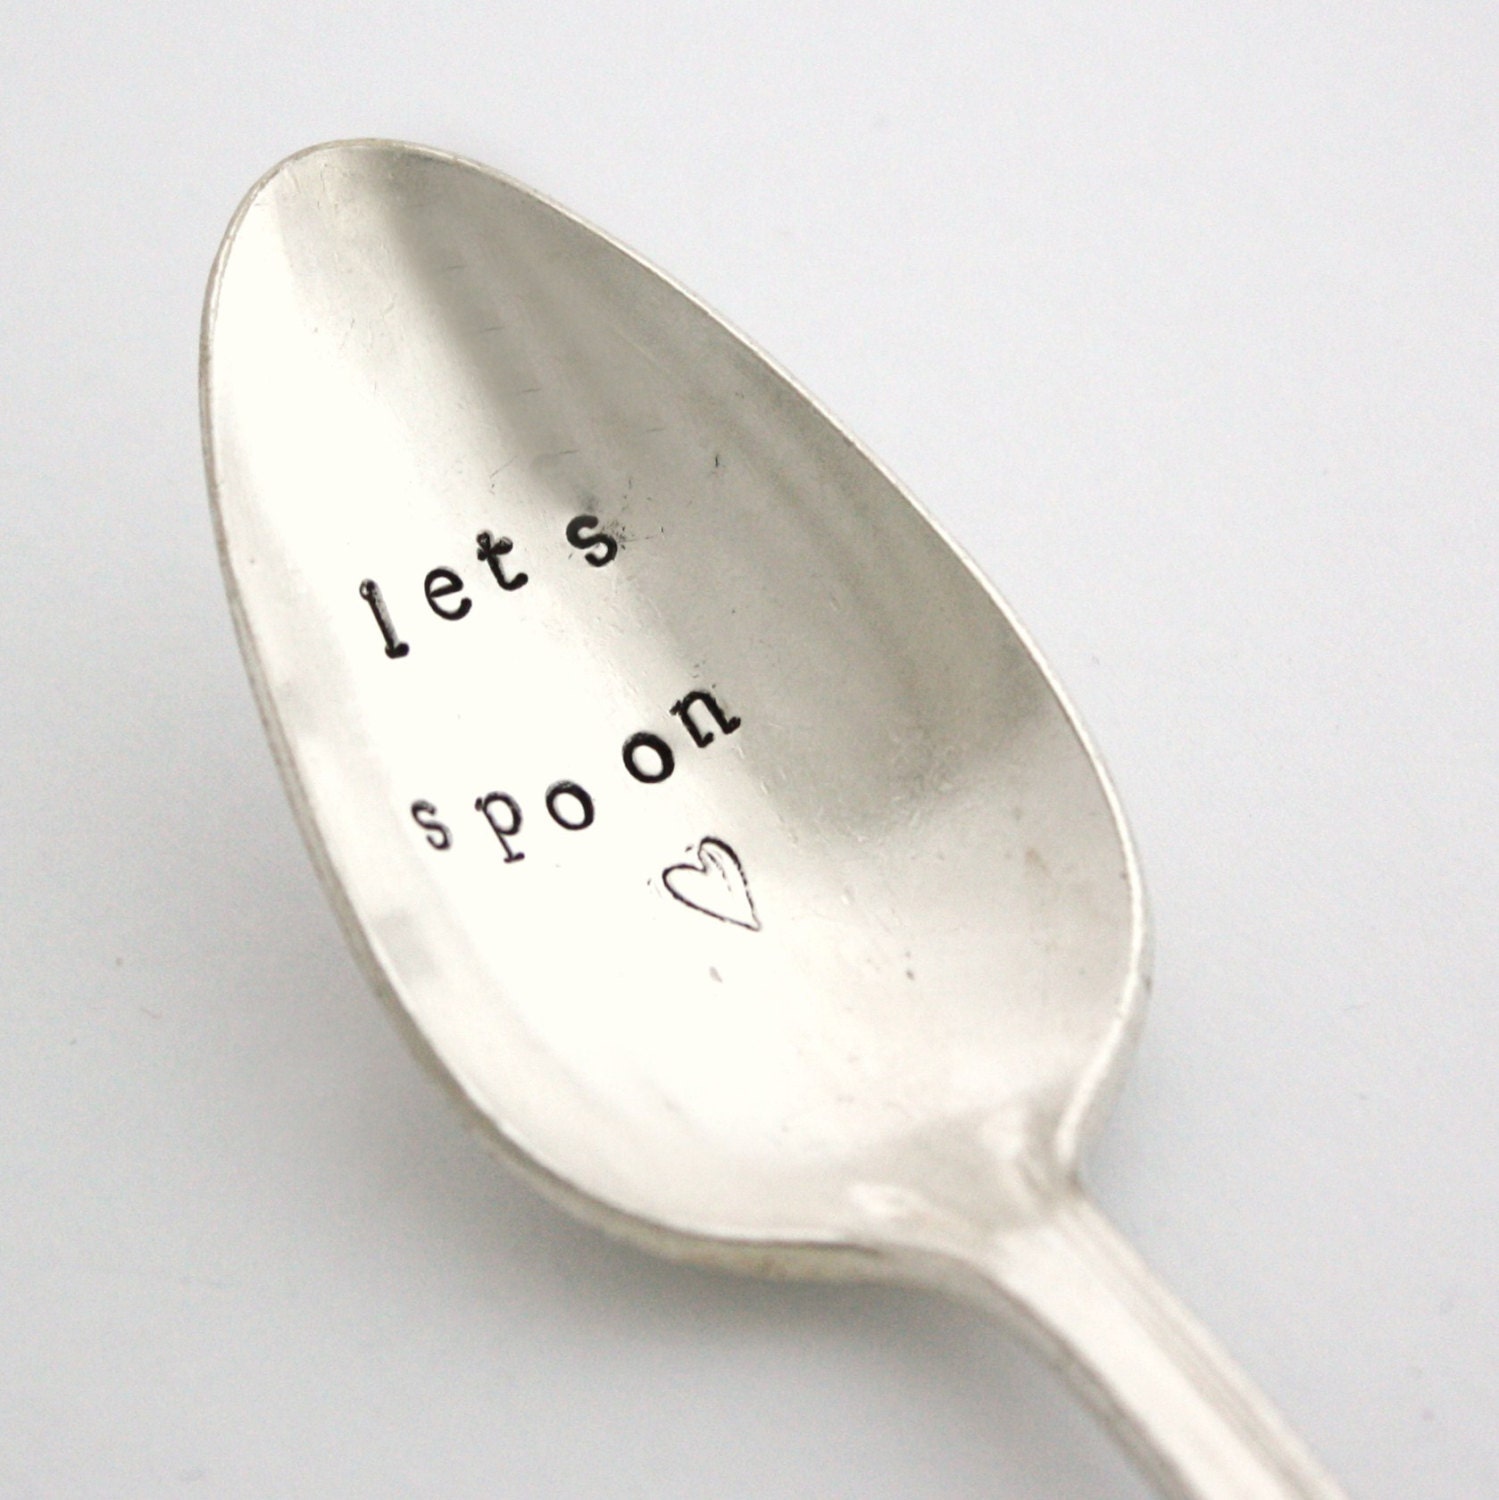 Lets Spoon, Hand stamped silver spoon for unique Valentines gift. Simple style is great for him.